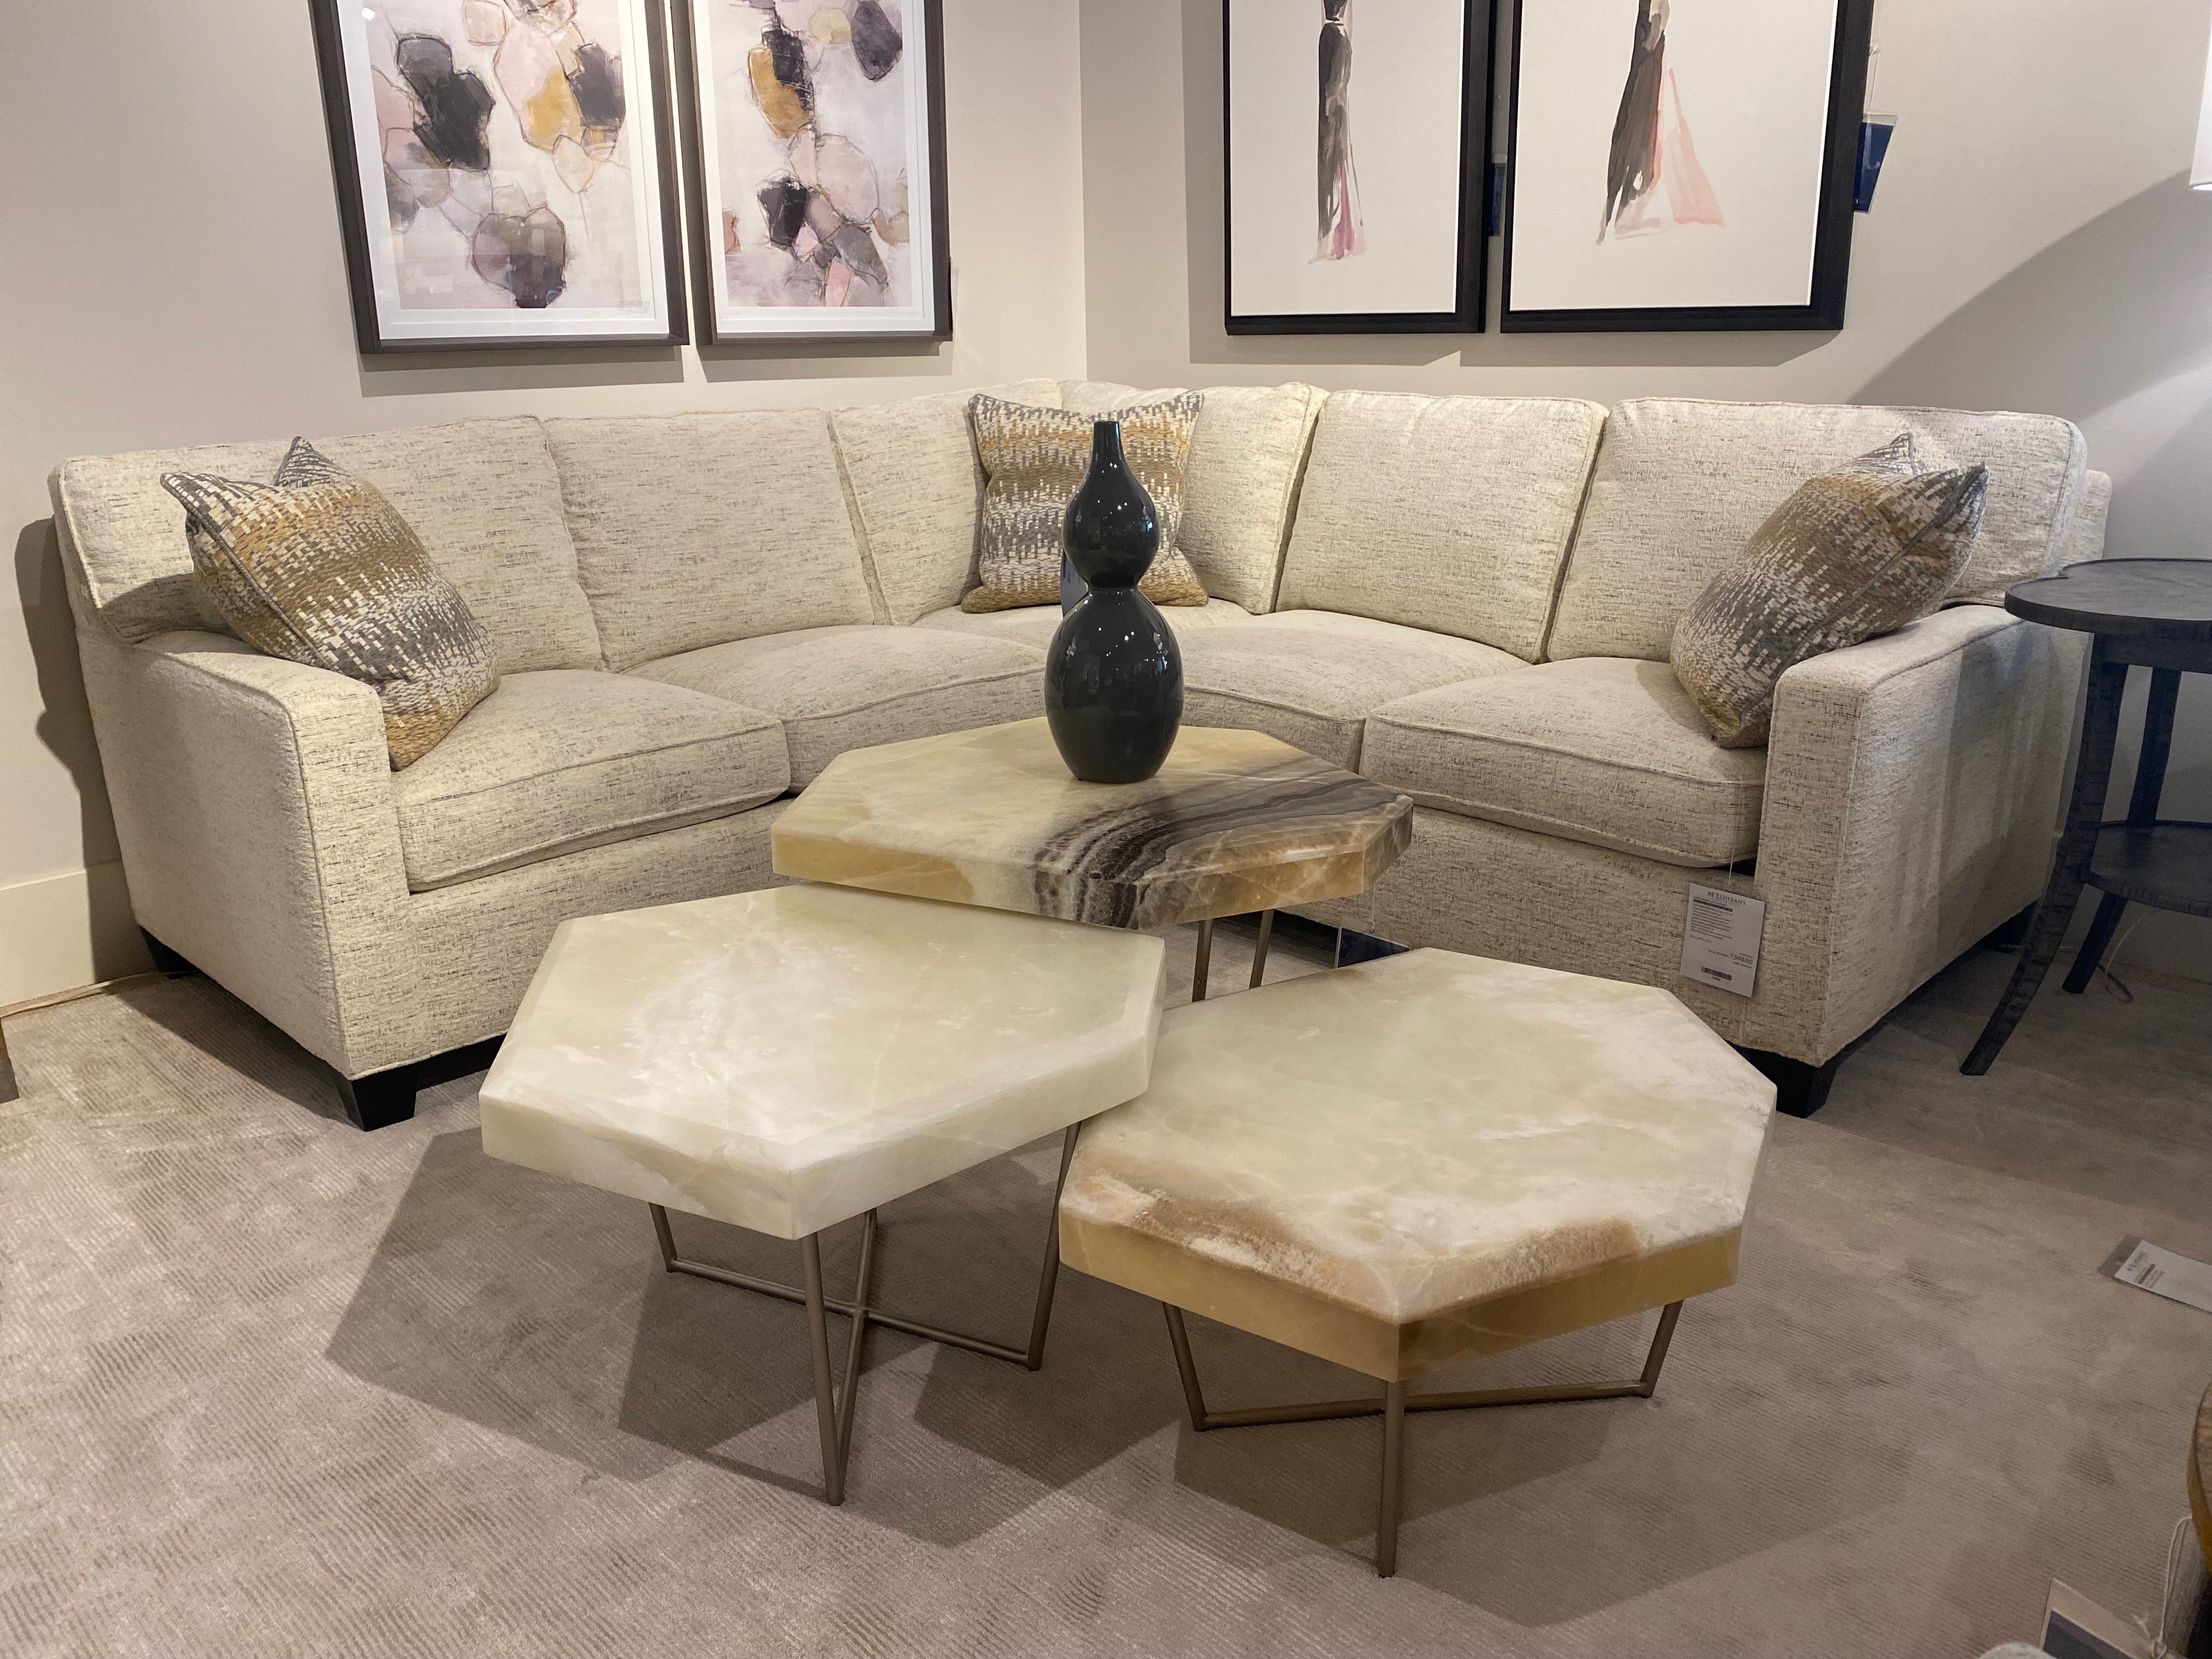 three nesting cocktail tables in front of an l-shaped sectional over  an area rug in a living room setting